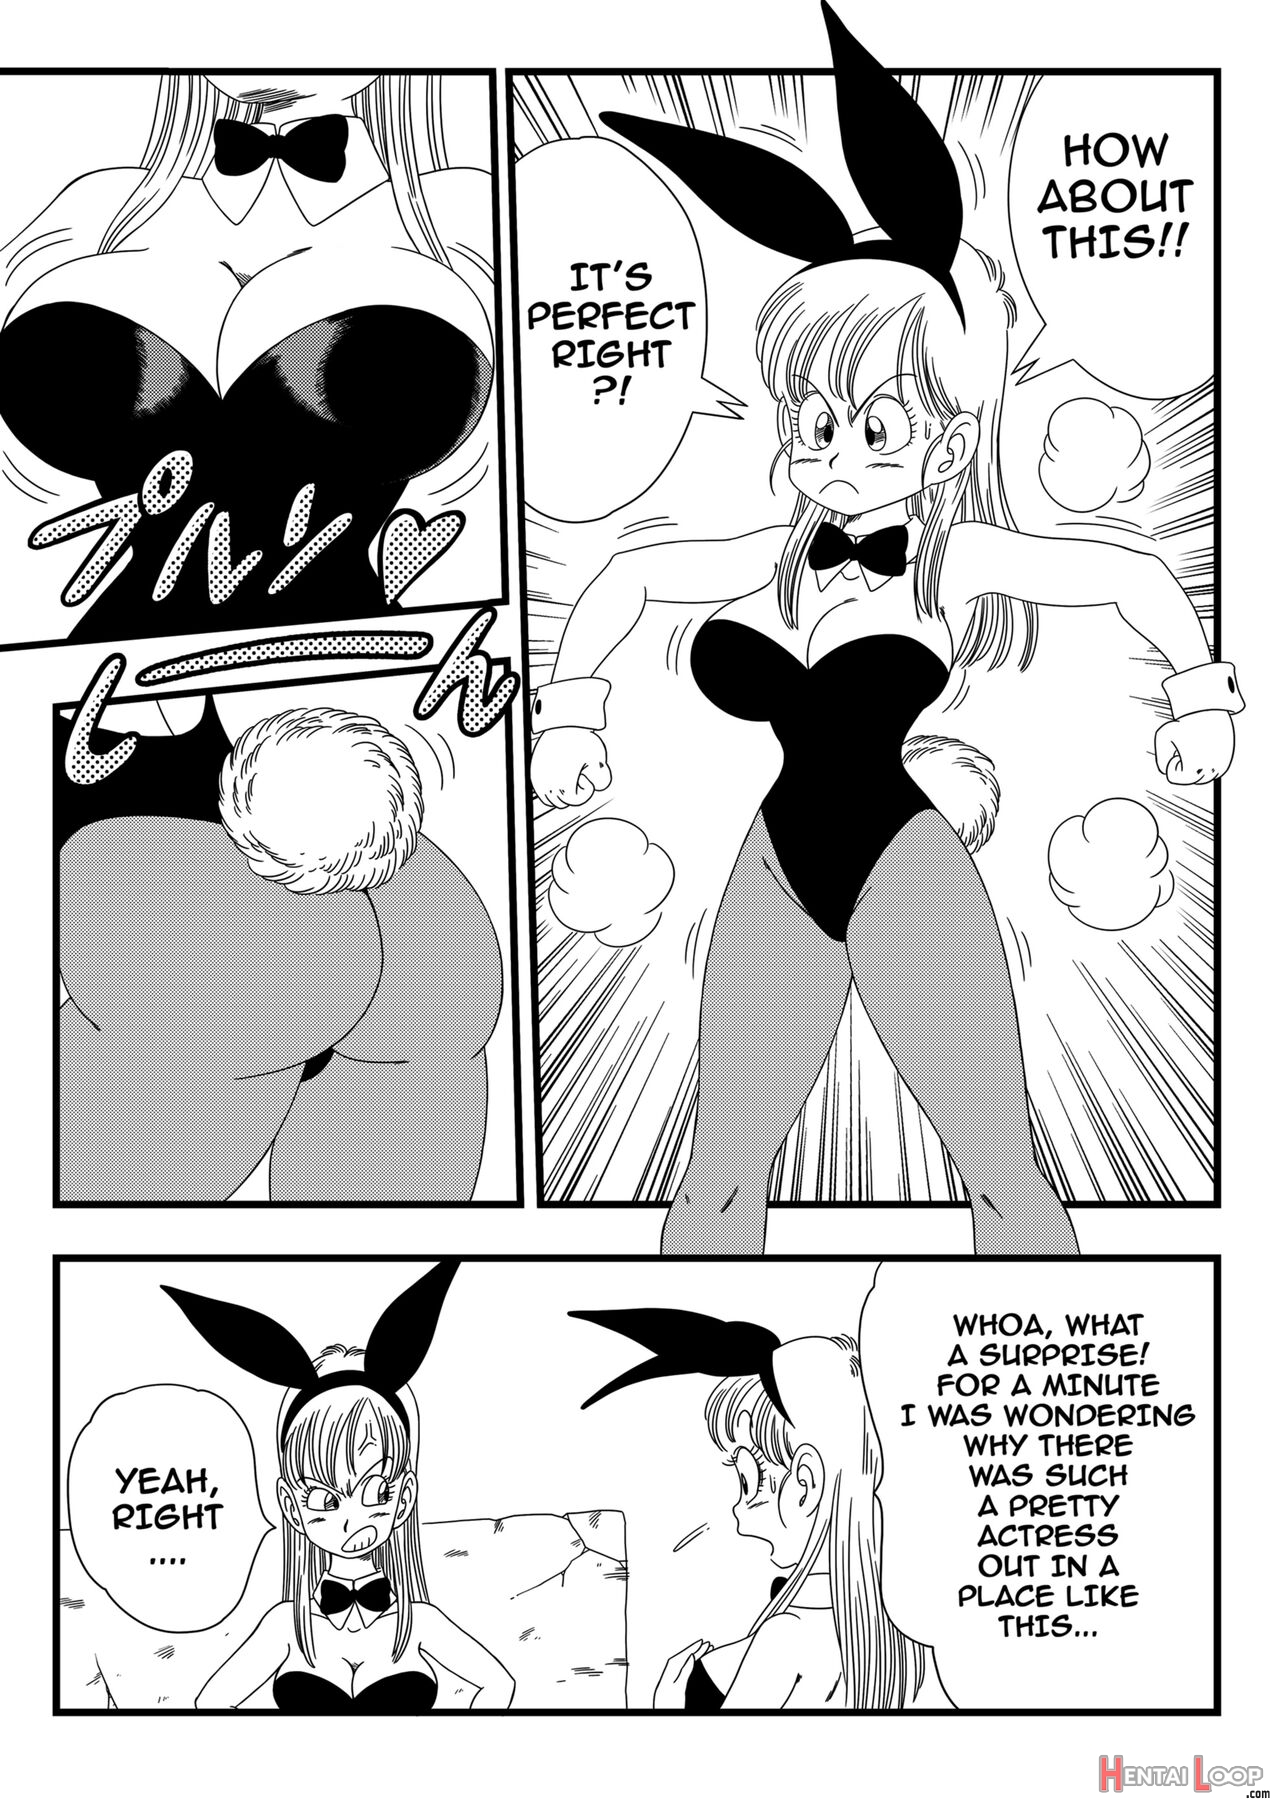 Bunny Girl Transformation page 5